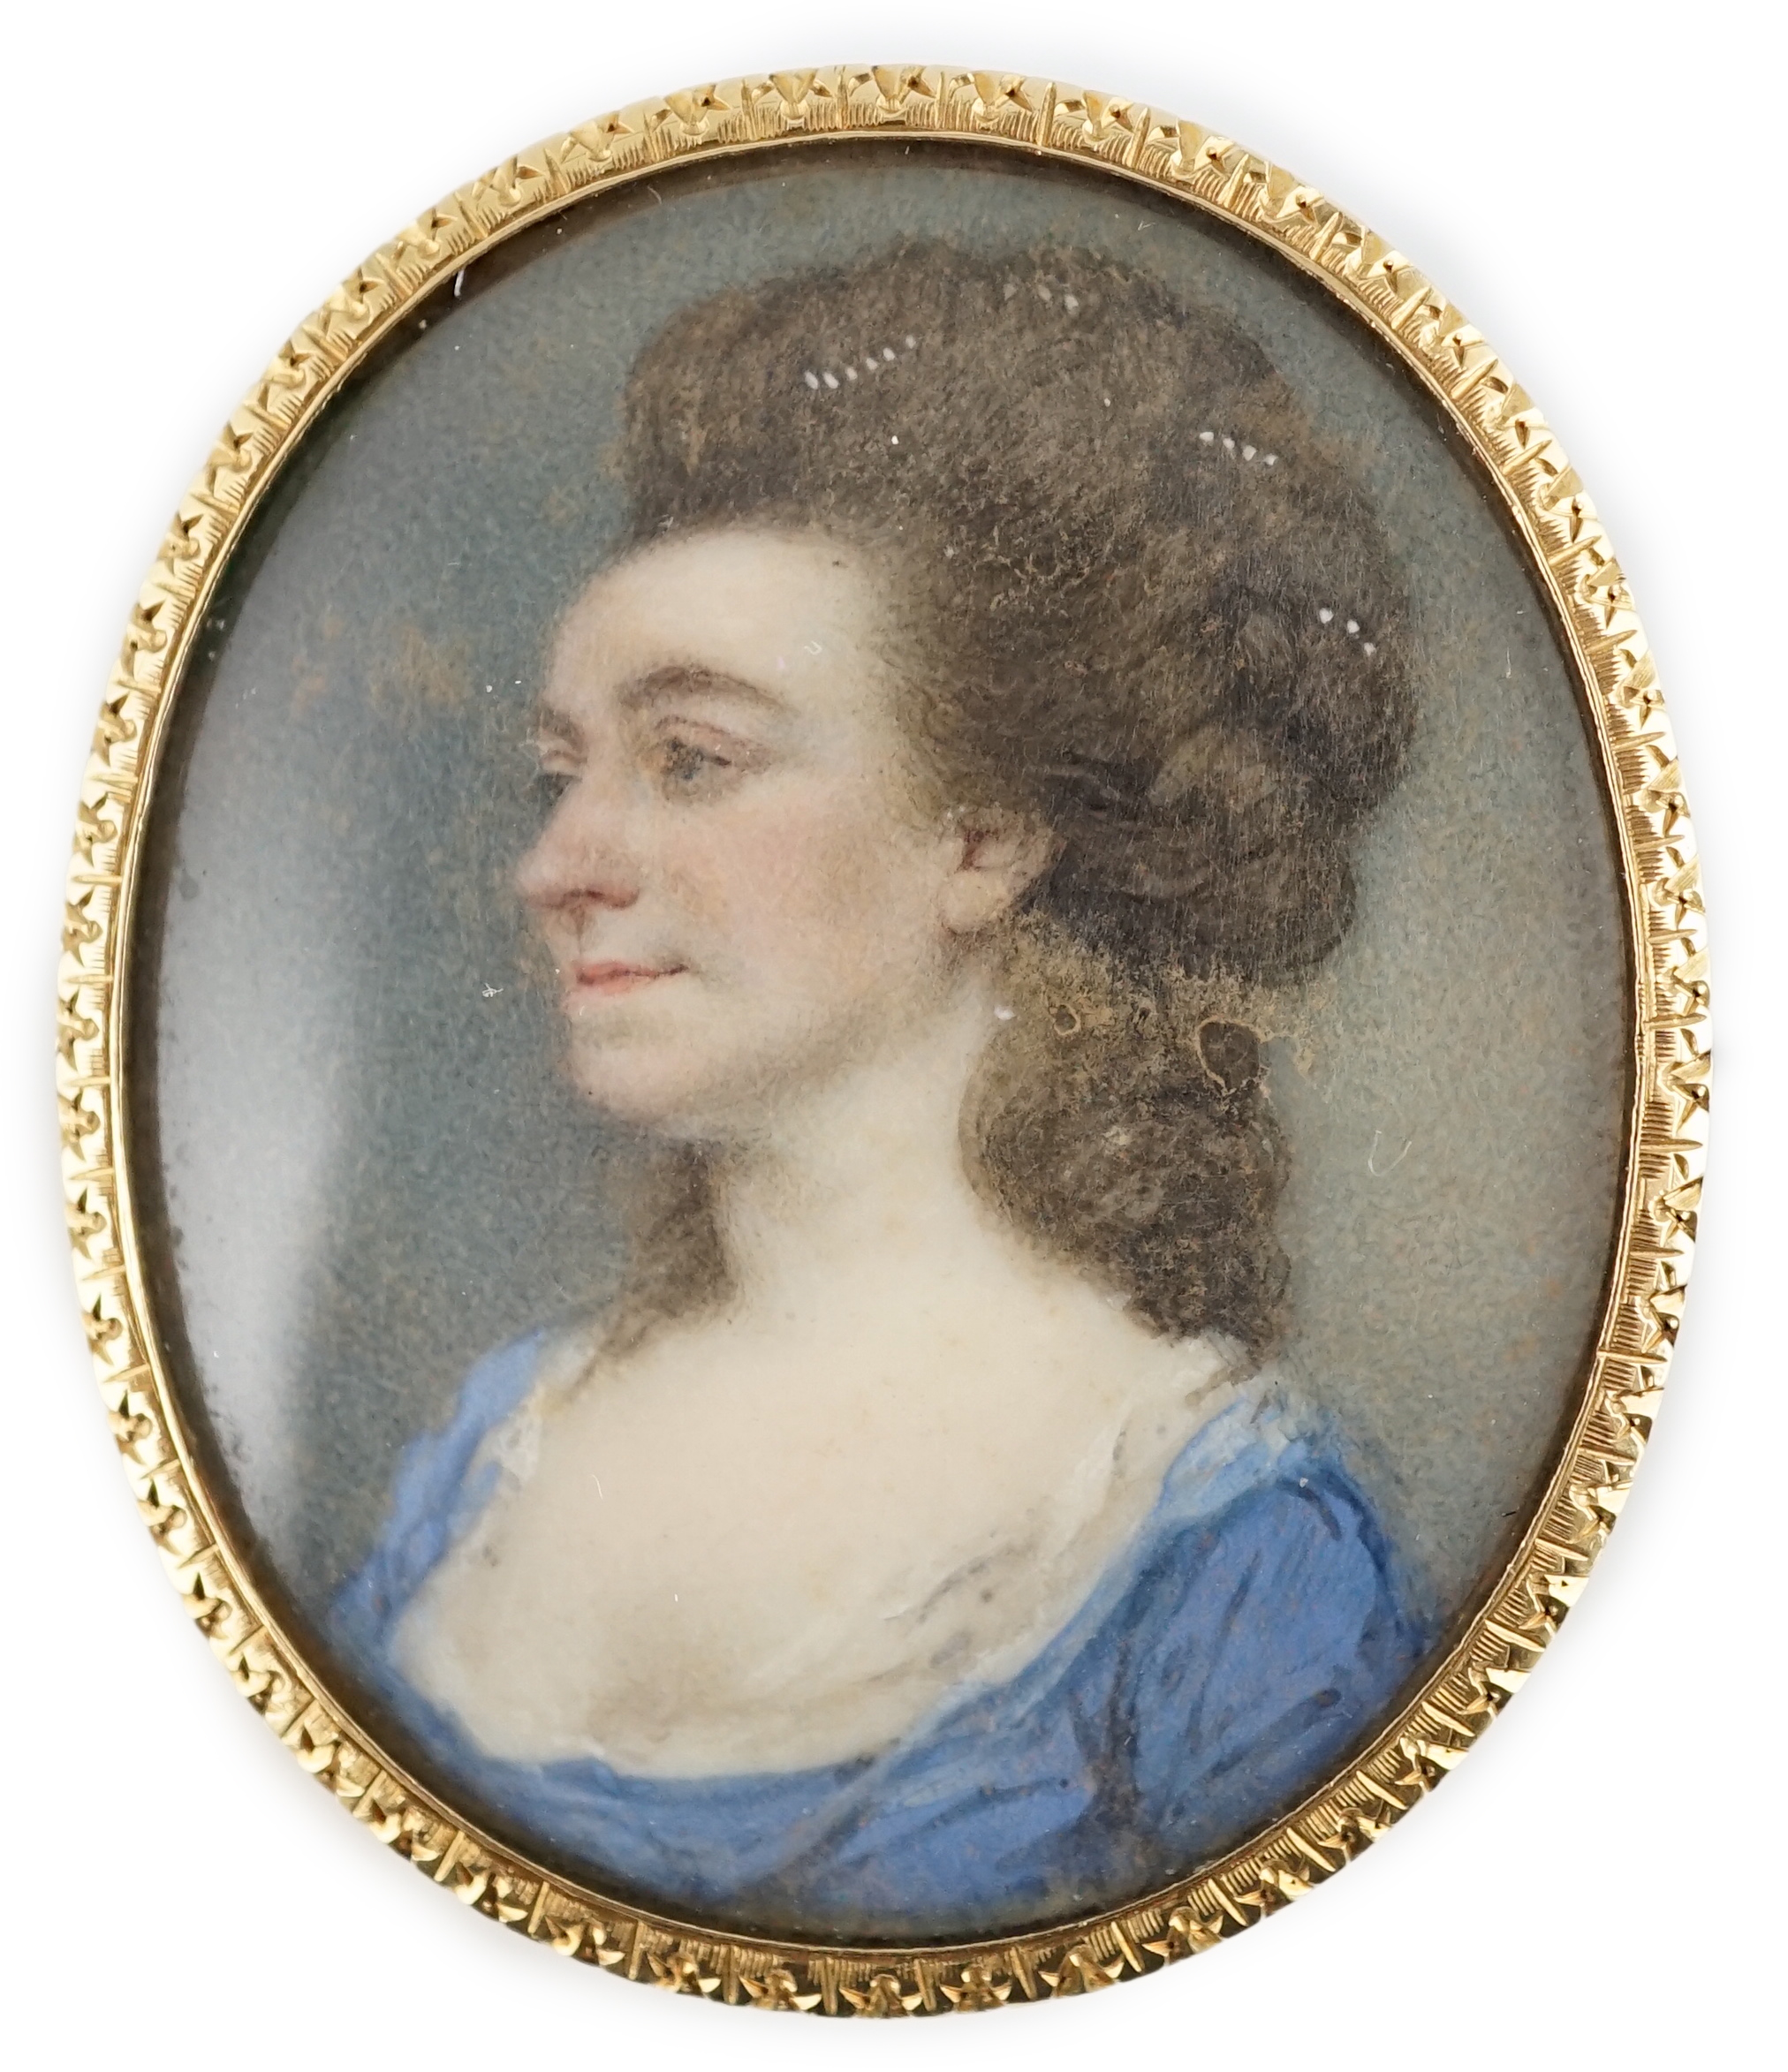 Attributed to Ozias Humphrey, (English, 1742-1810), Portrait miniature of a lady, oil on ivory, 3.2 x 2.6cm. CITES Submission reference 61HFS2K1